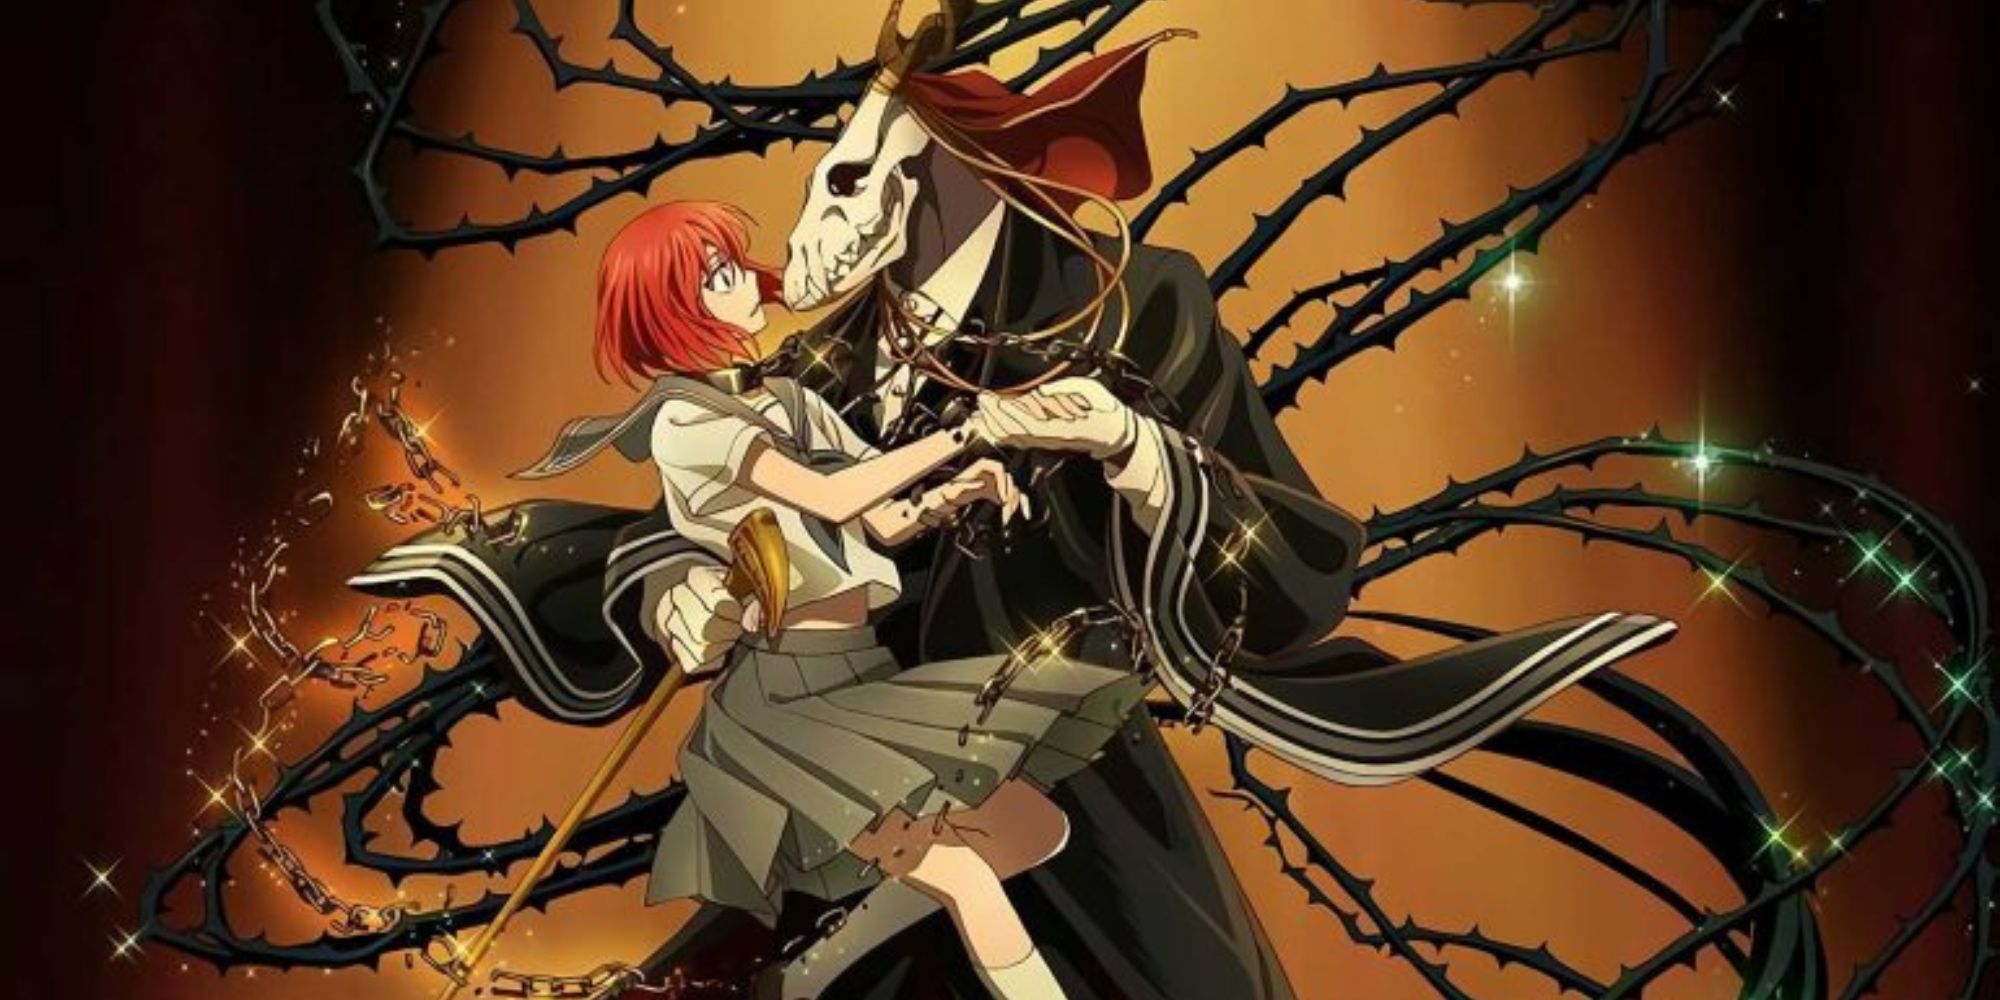 Chise and Elias in The Ancient Magus' Bride